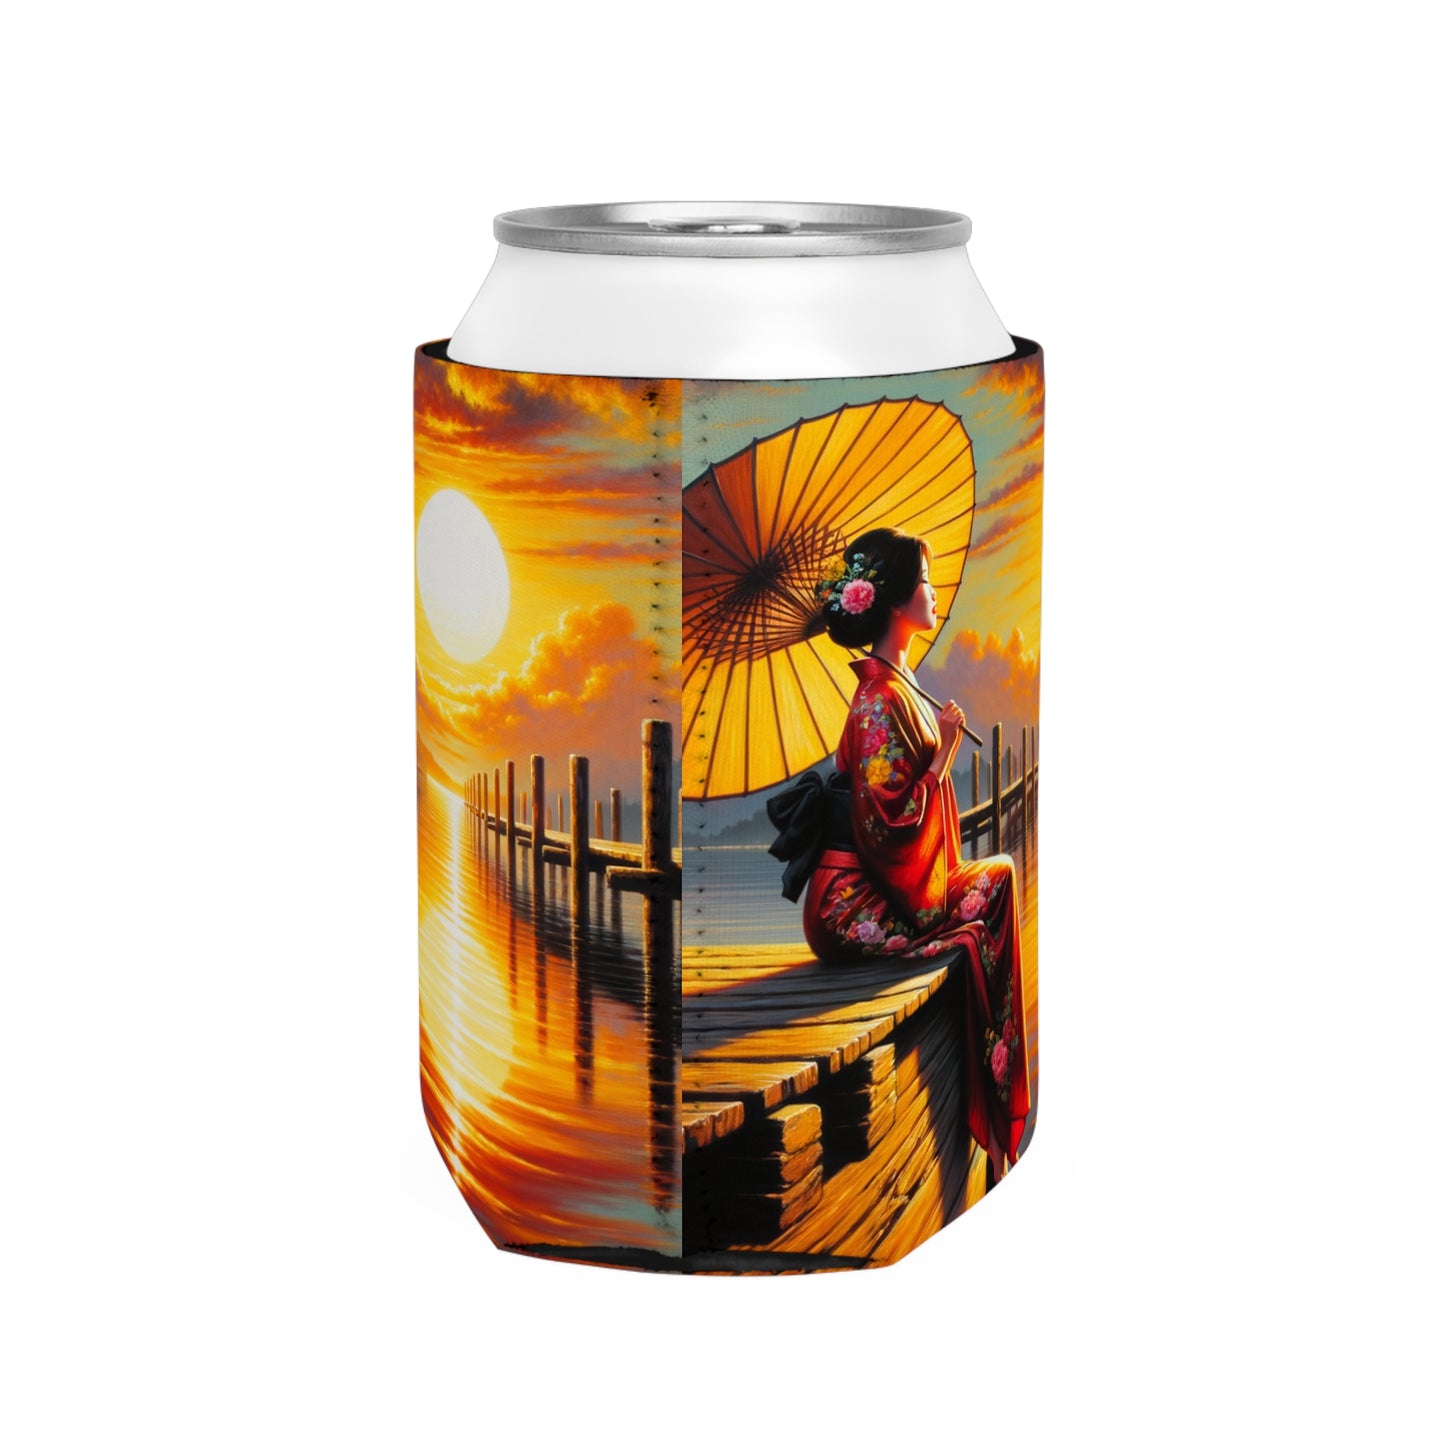 "Golden Reflections" - The Alien Can Cooler Sleeve Impressionism Style